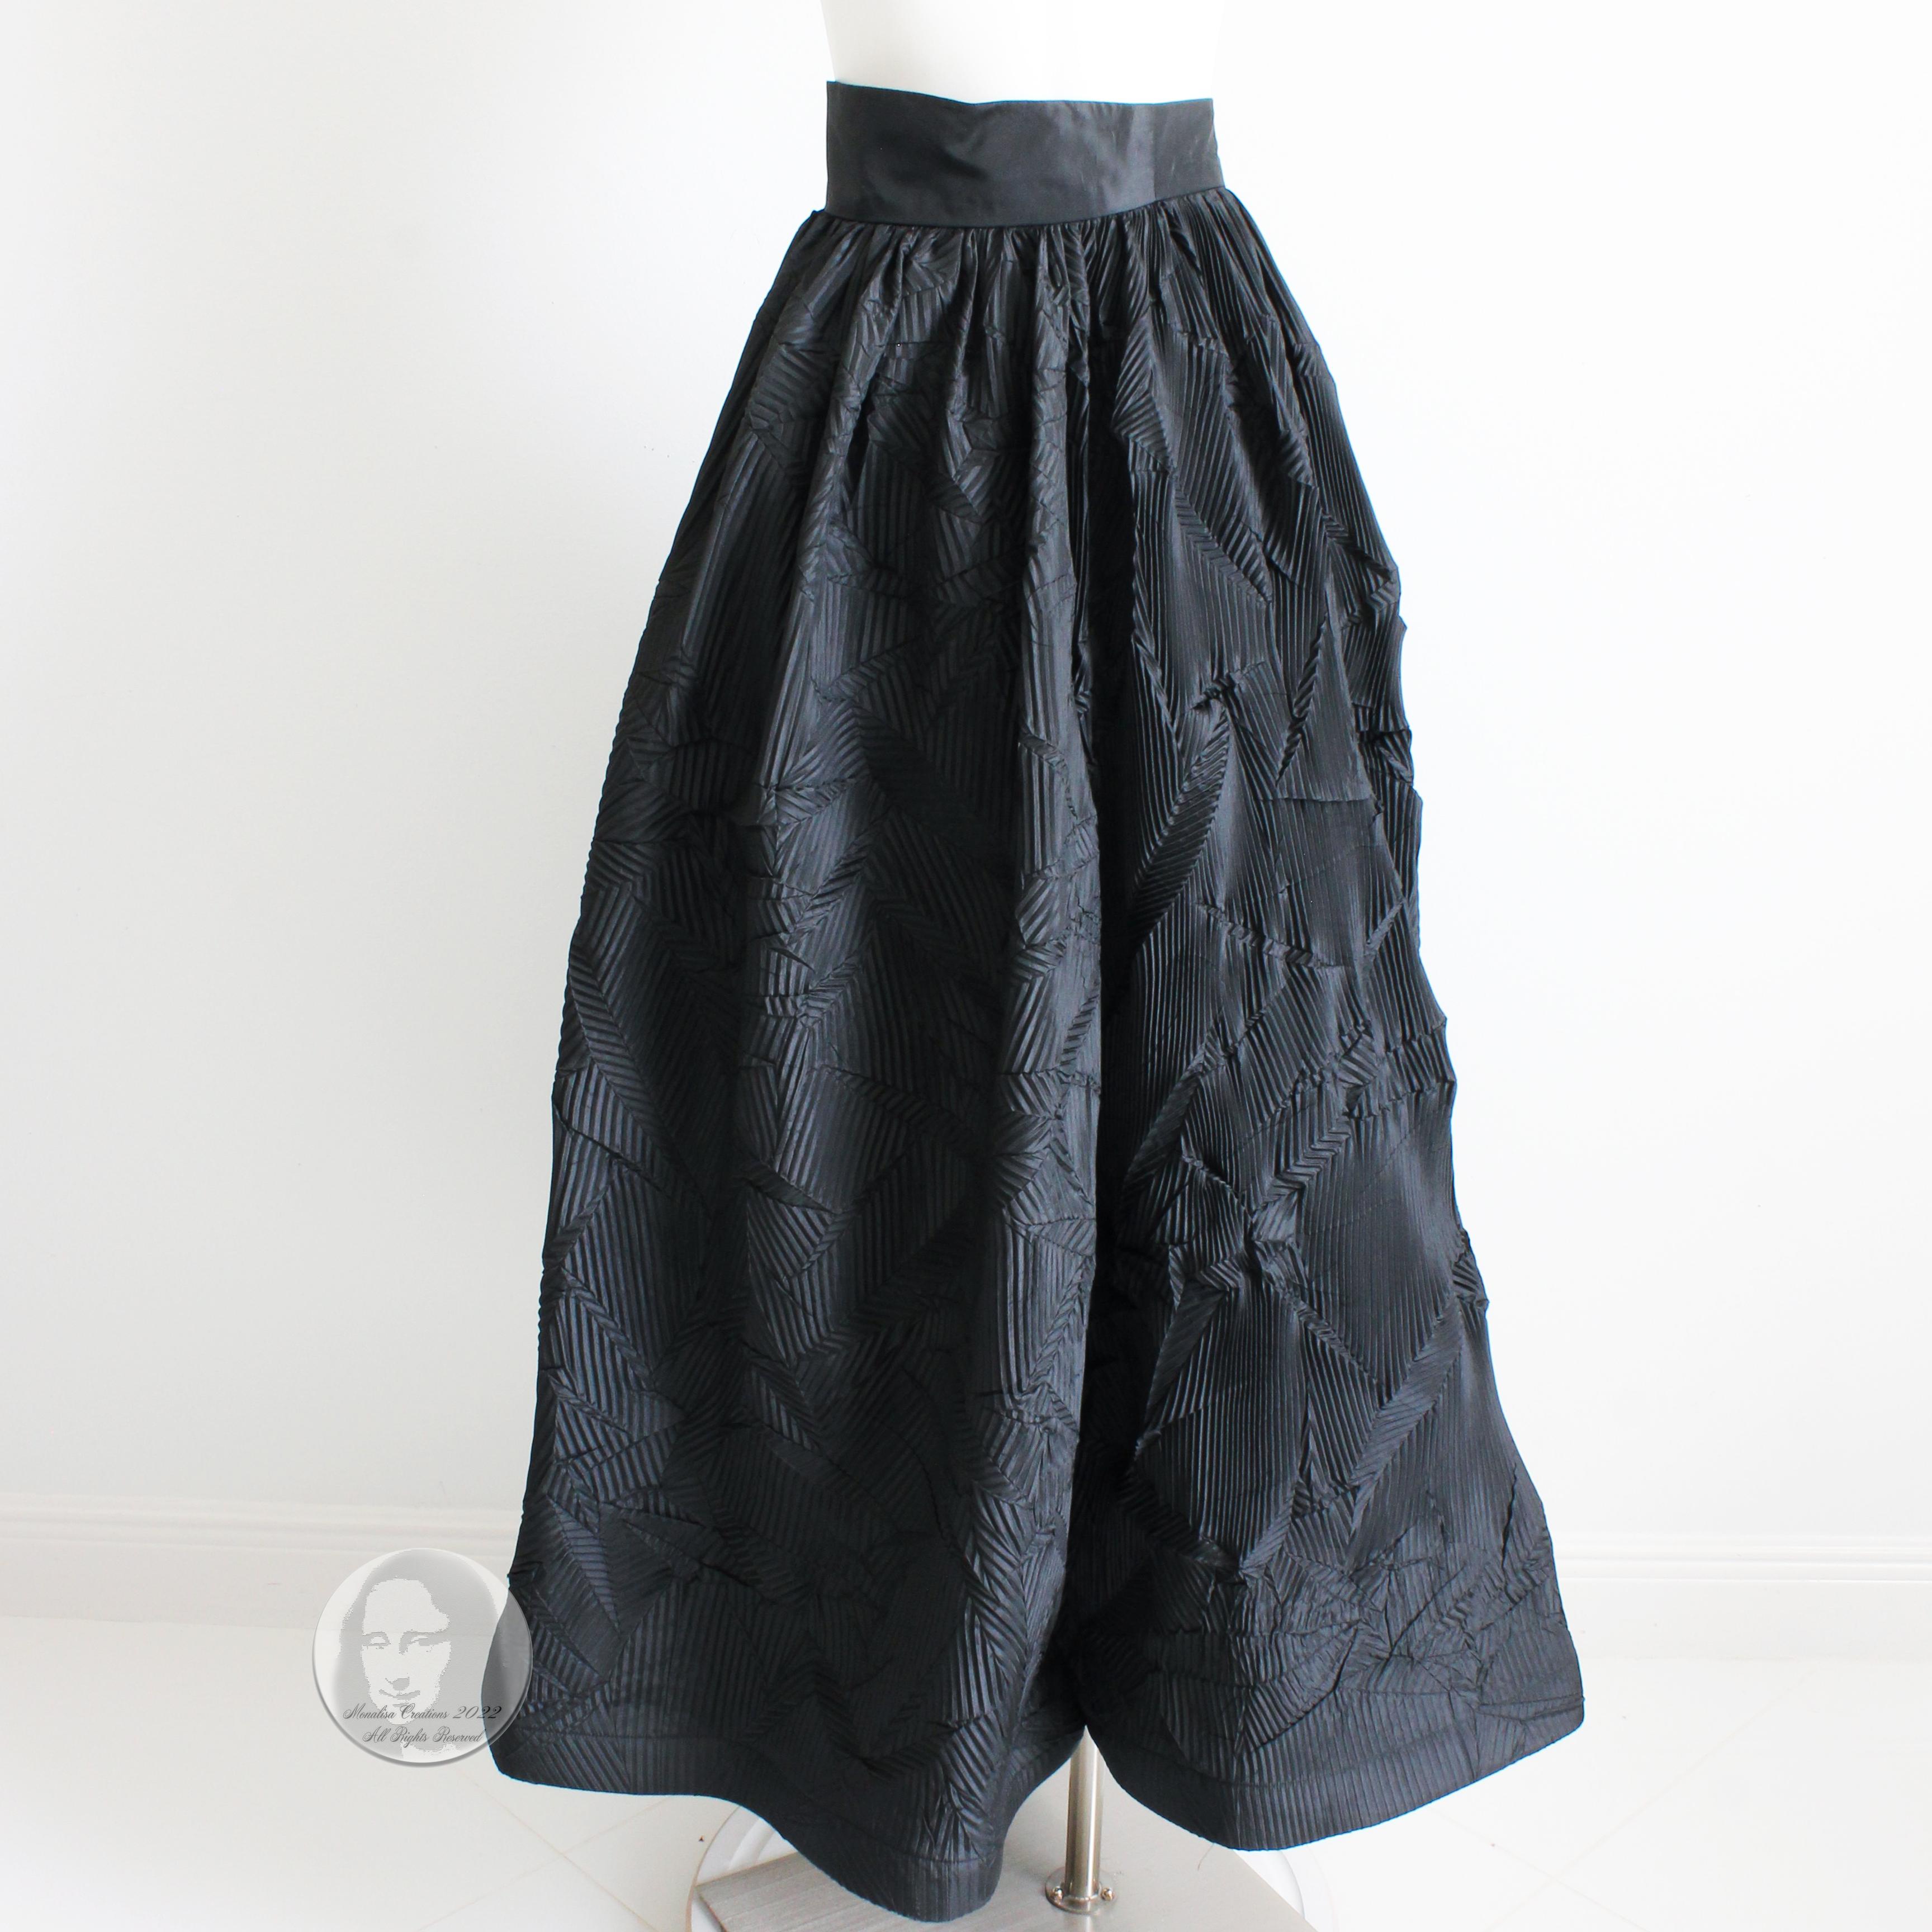 Sully Bonnelly Formal Skirt Black Full Length Abstract Pleated Avant Garde Sz 8 In Good Condition For Sale In Port Saint Lucie, FL